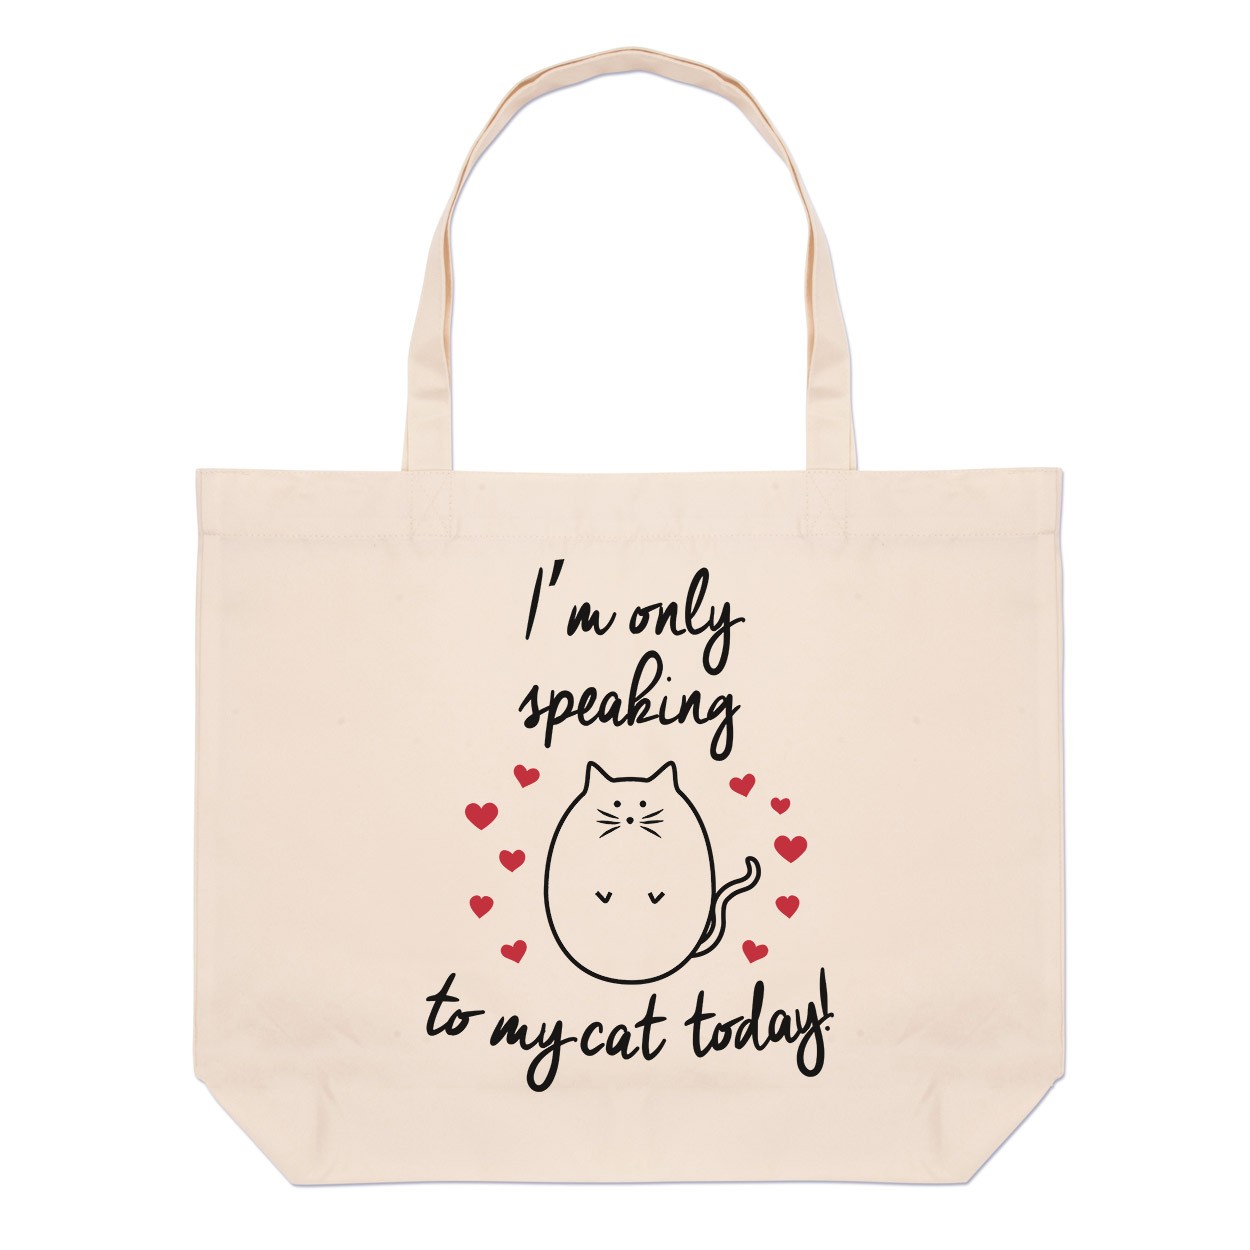 I'm Only Speaking To My Cat Today Large Beach Tote Bag